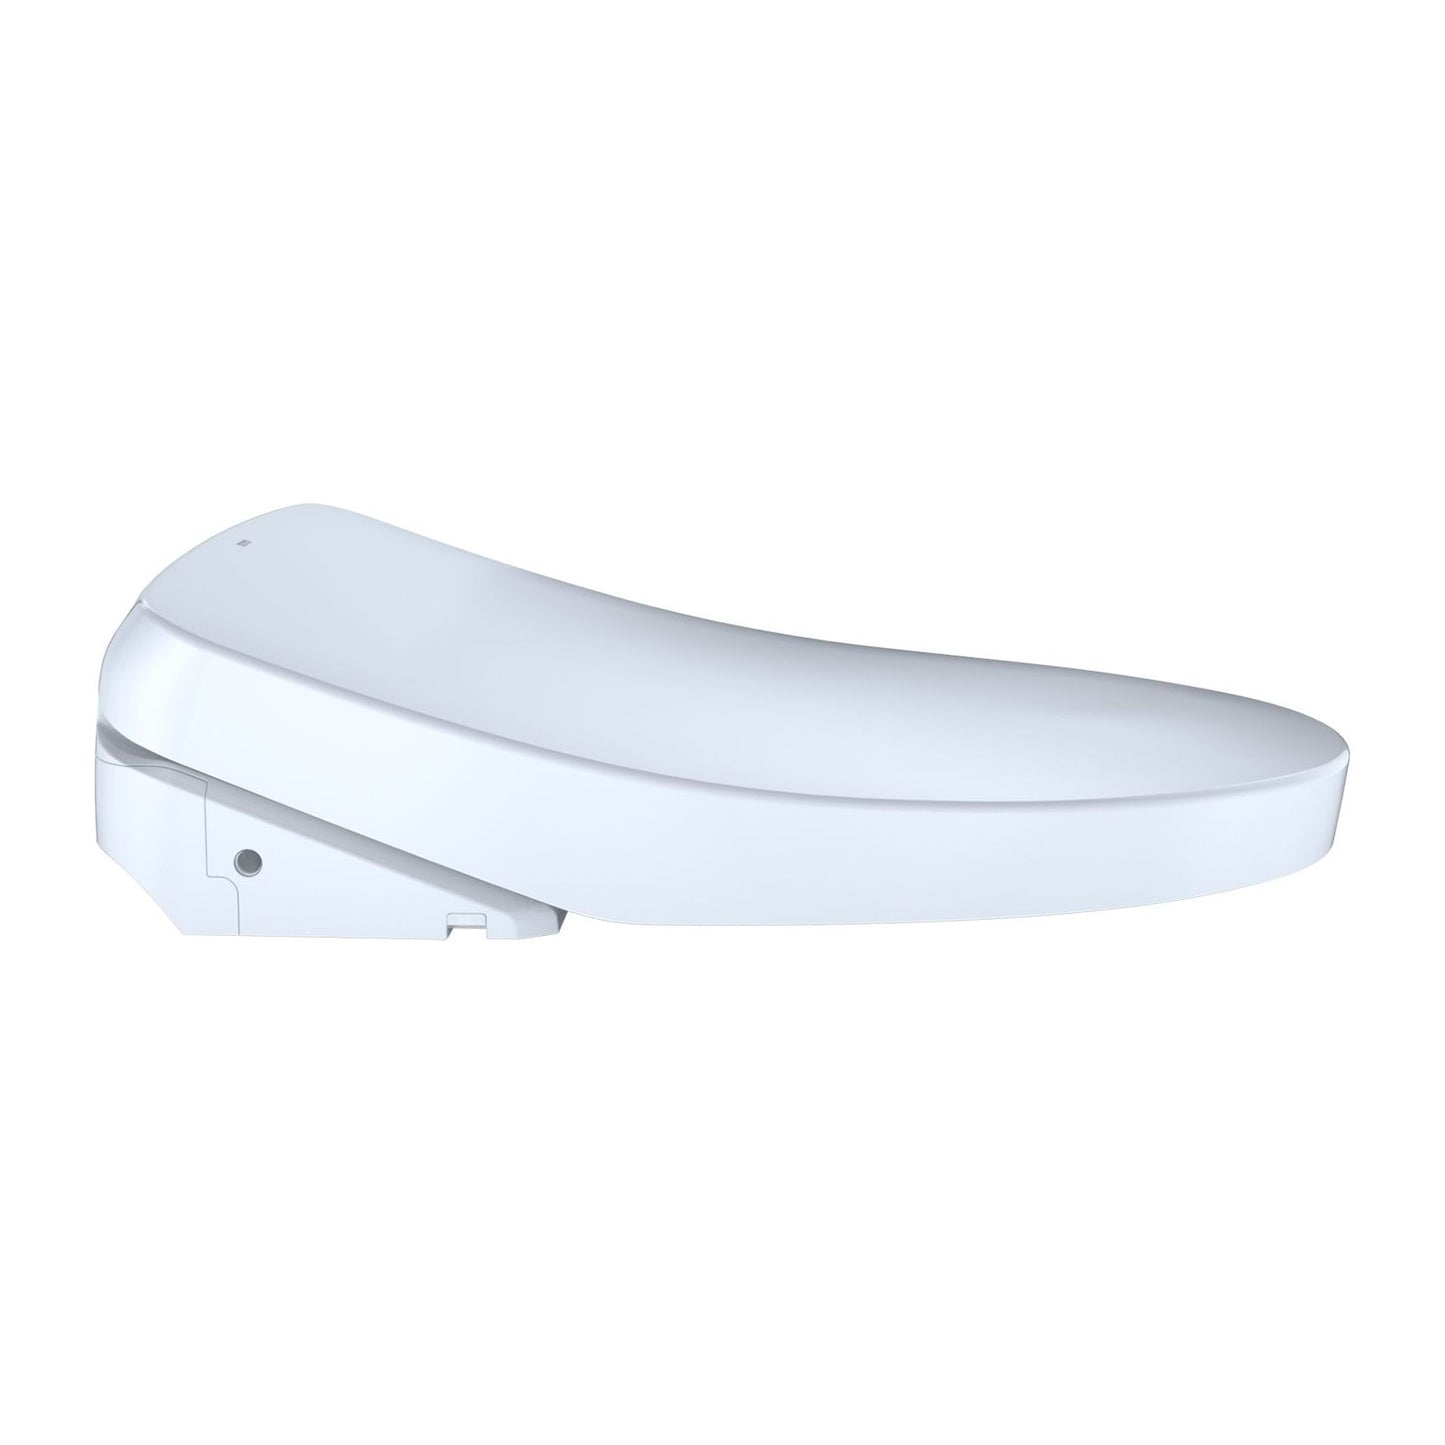 Toto SW3056#01 - Washlet S550E Elongated Bidet Seat with Remote and Dual Action Spray - Cotton White